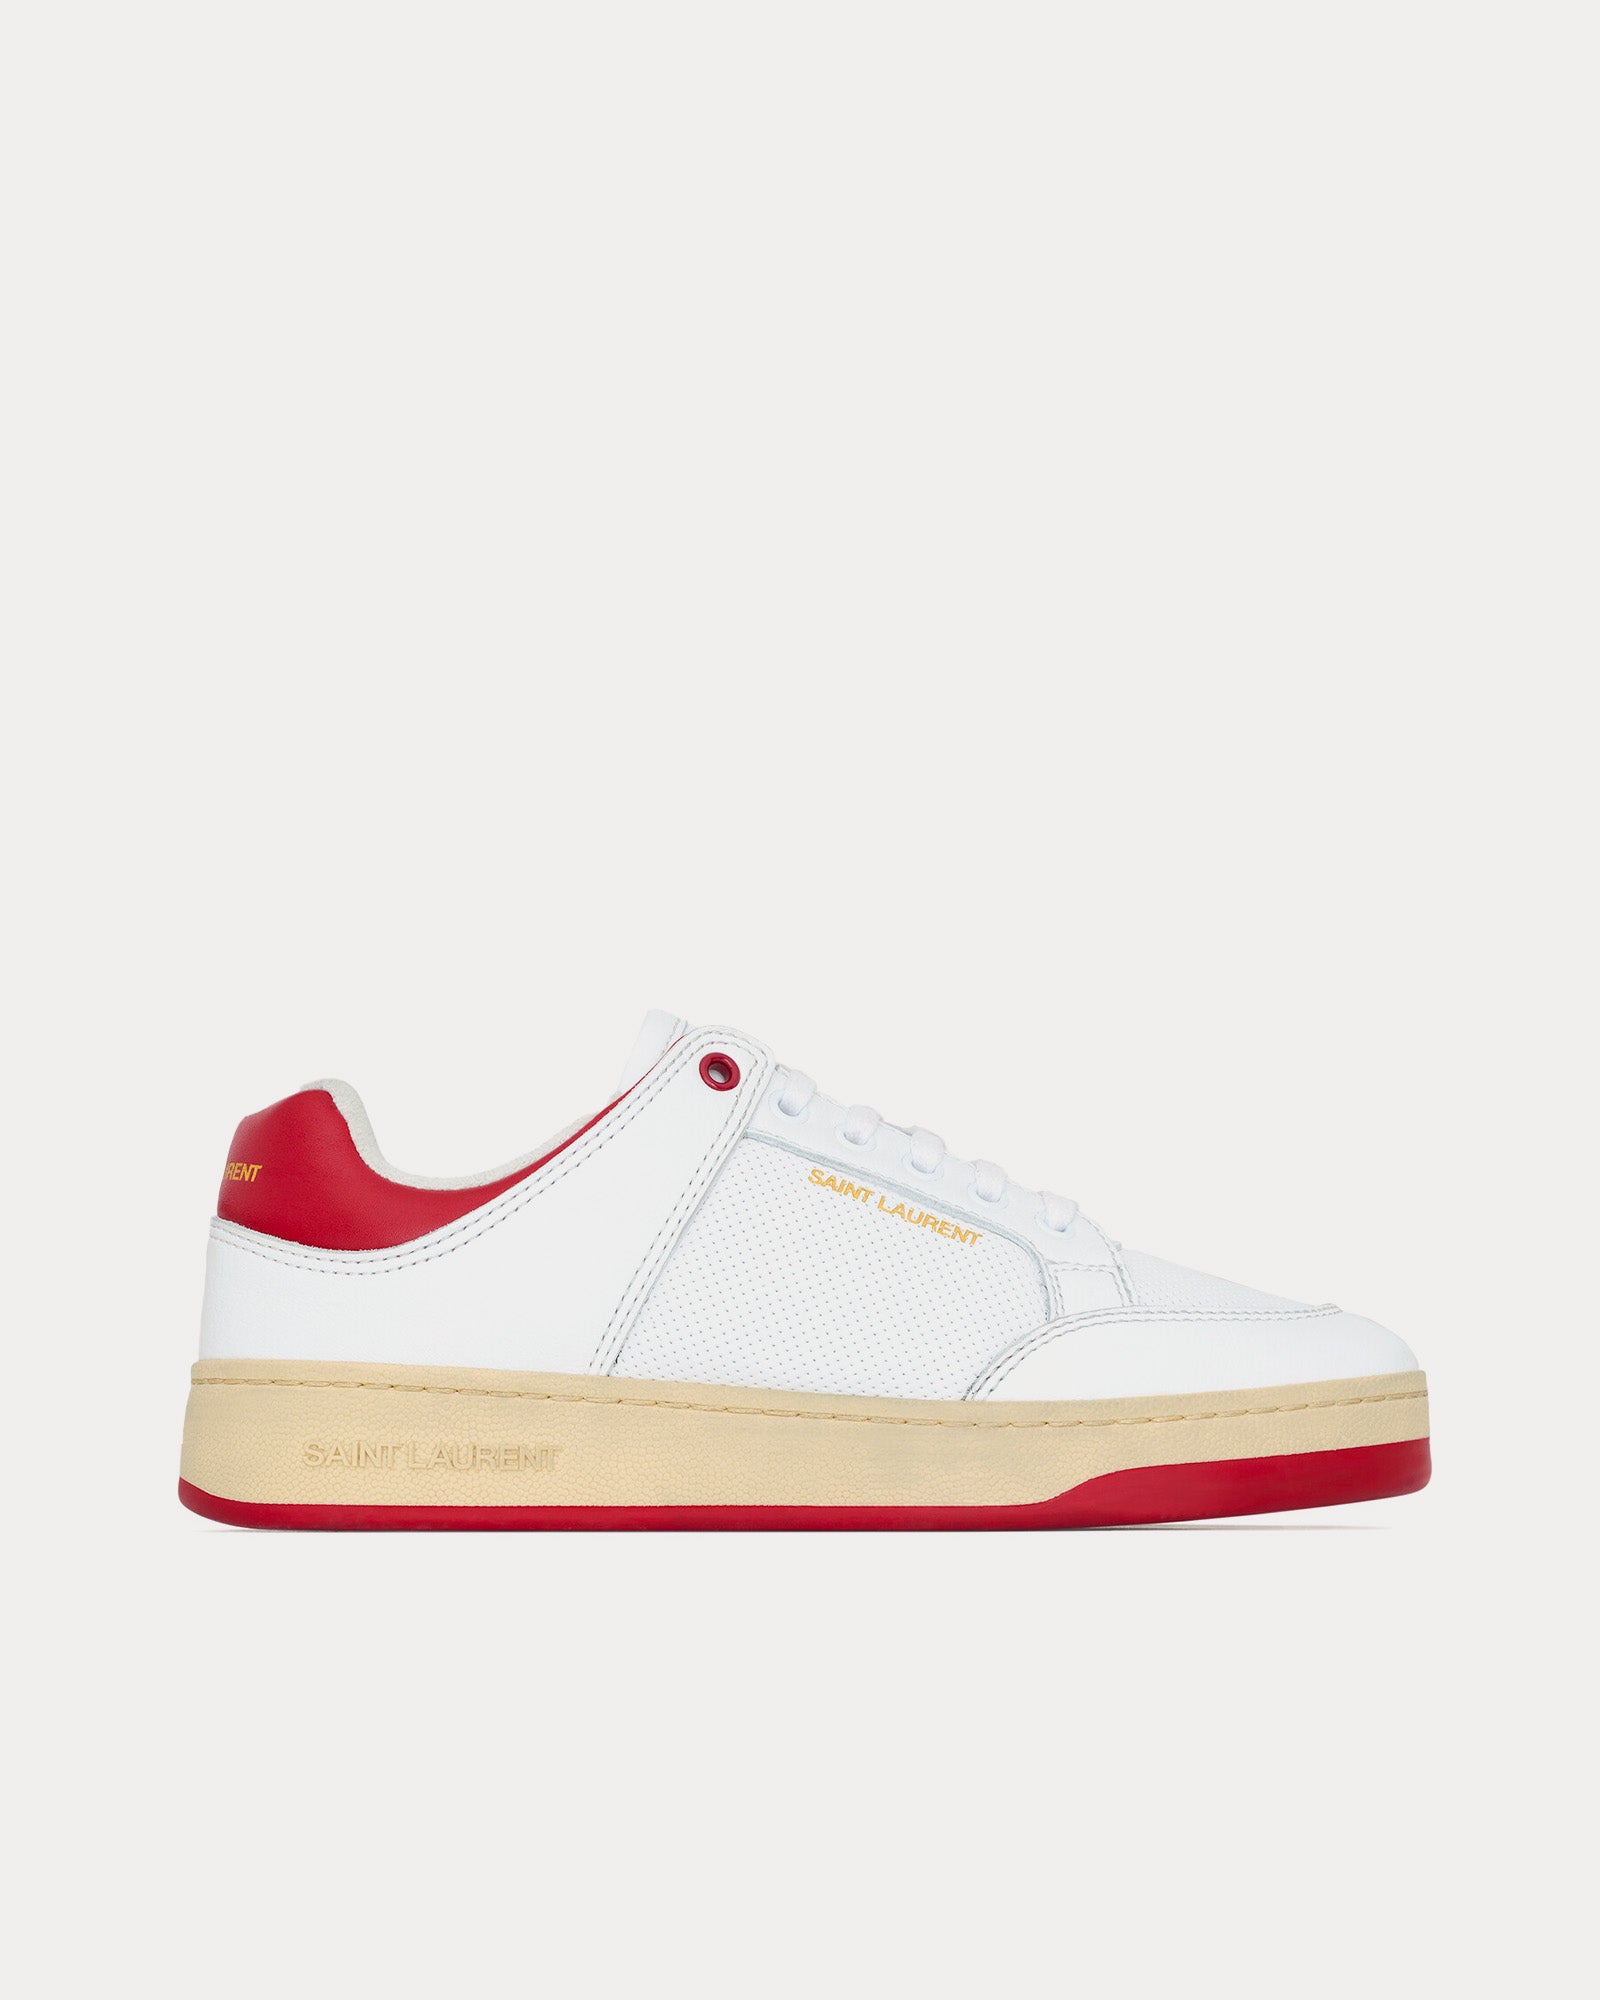 Saint Laurent - SL/61 Grained Leather White / Vintage Red Low Top Sneakers